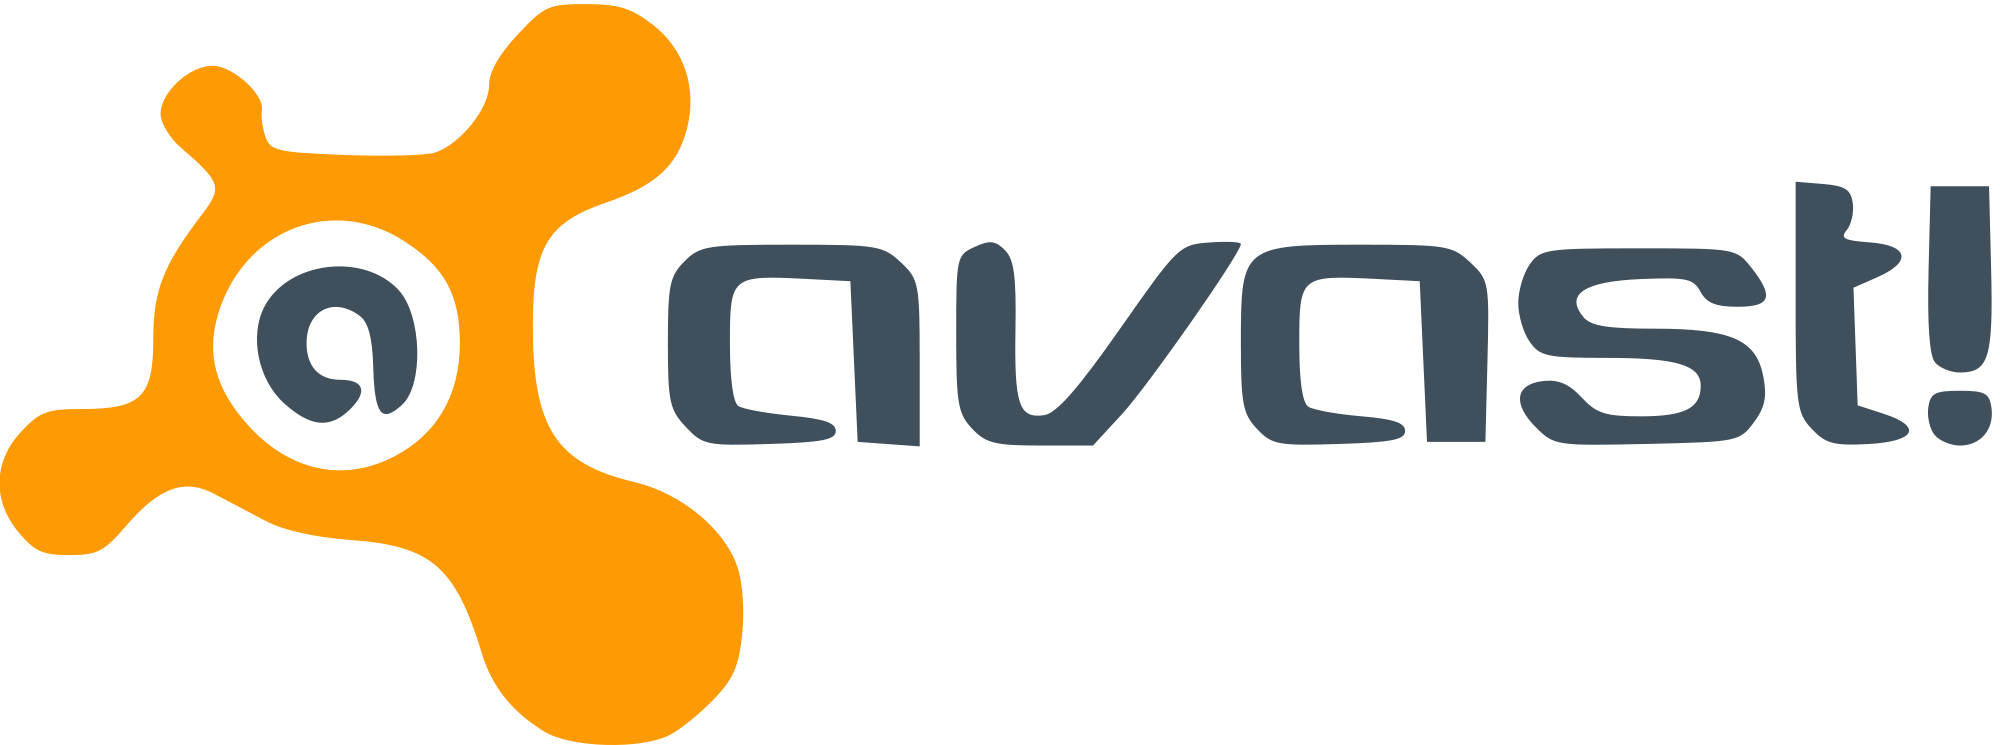 Image result for avast